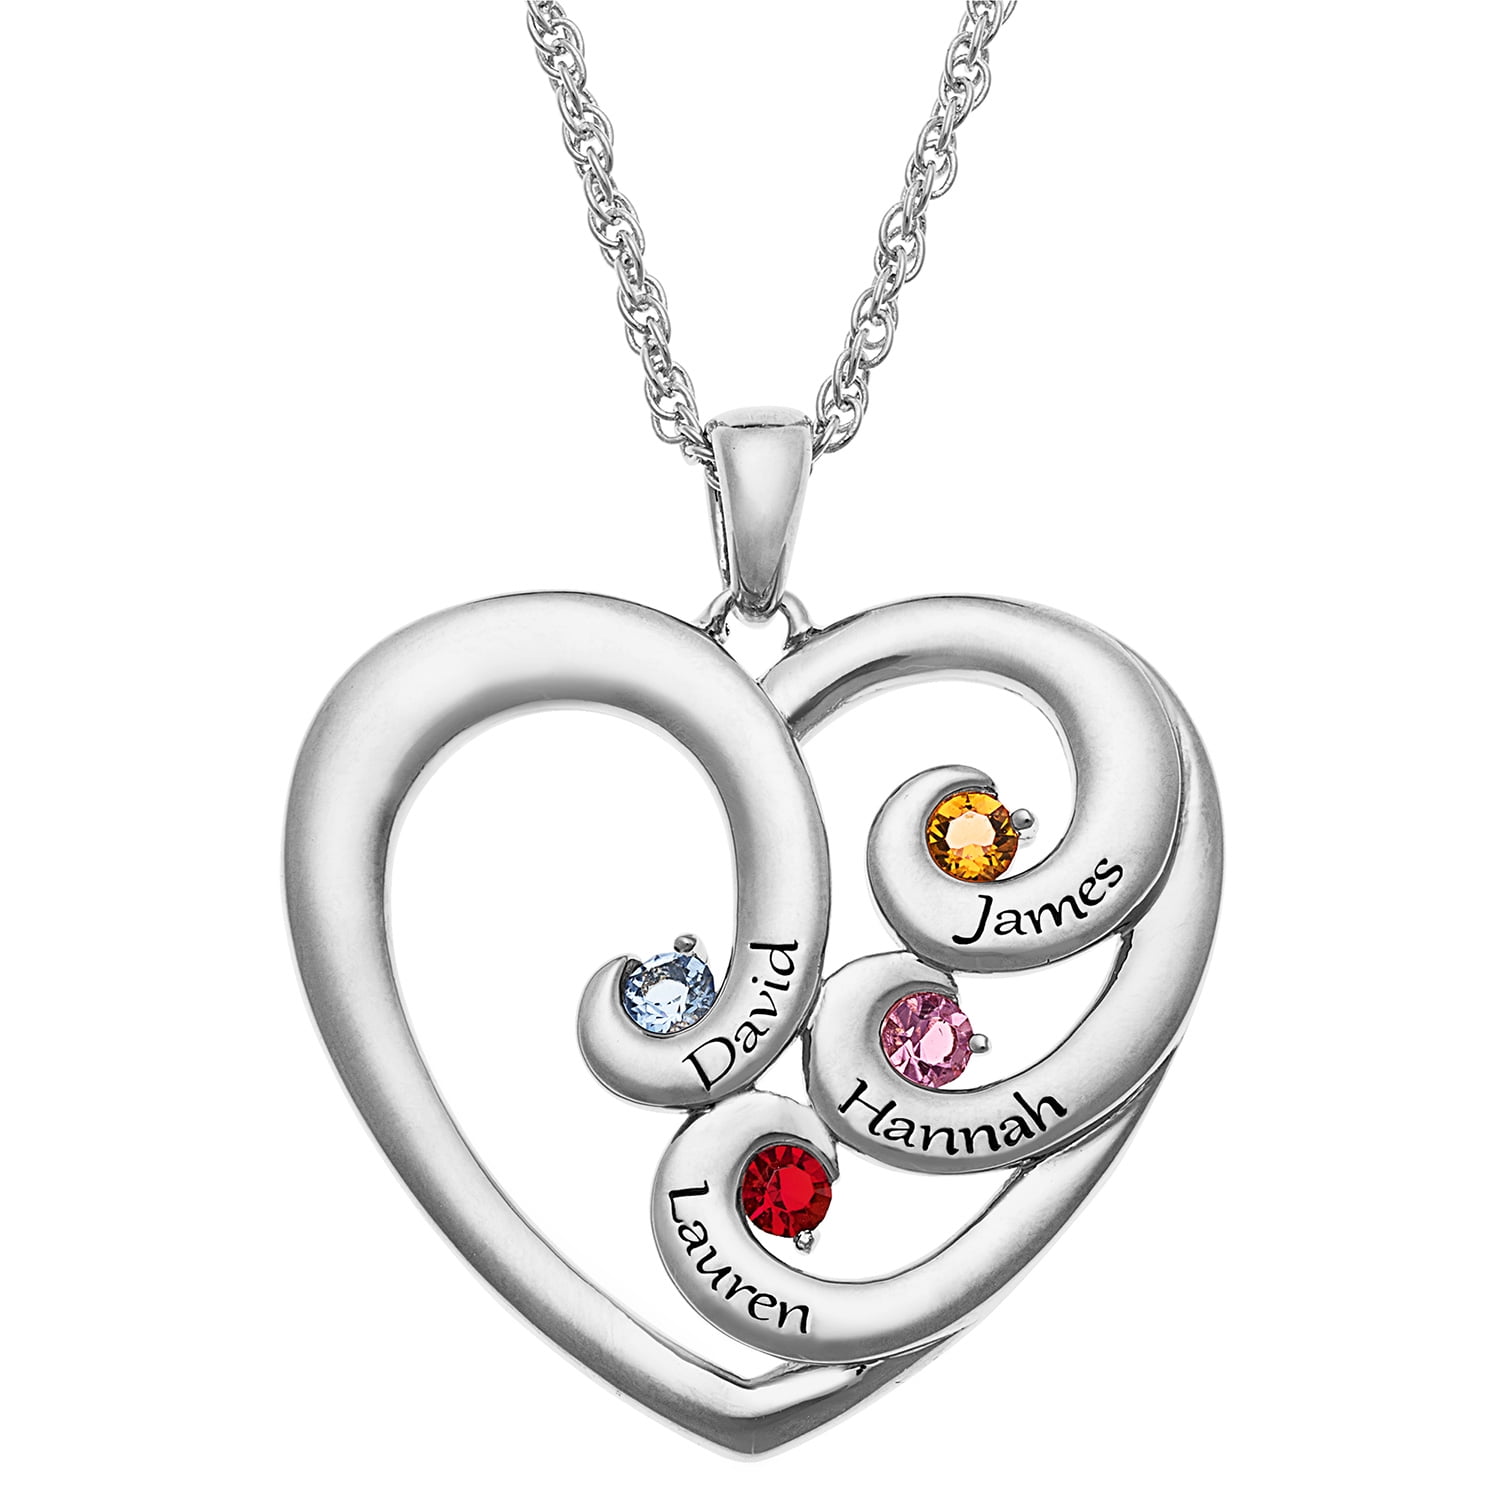 Family Jewelry Personalized Mother's Engraved Heart Silvertone or ...